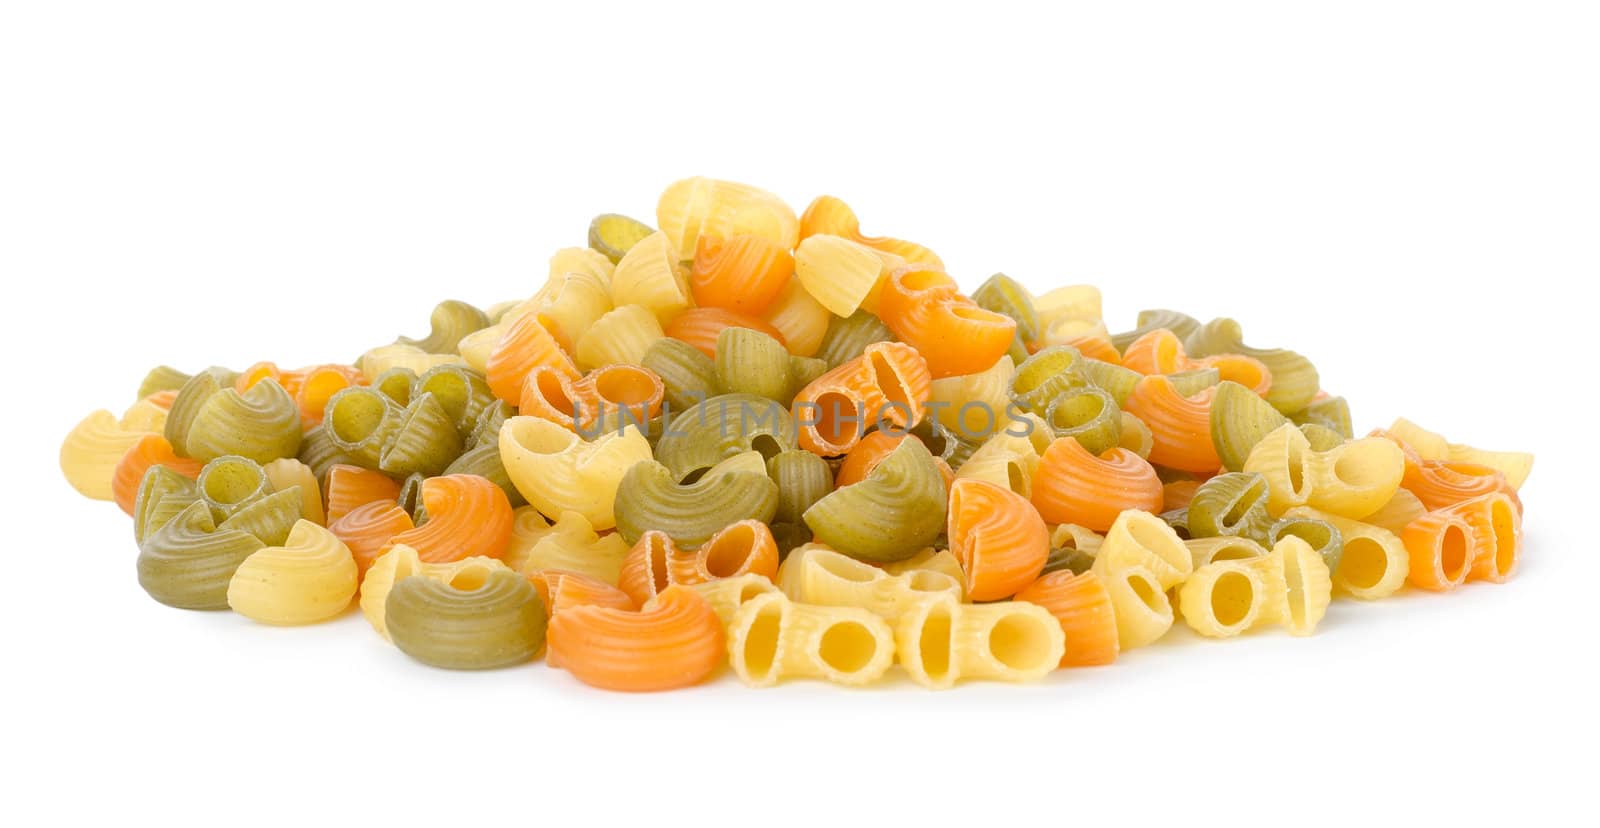  Mix of pasta isolated on a white background